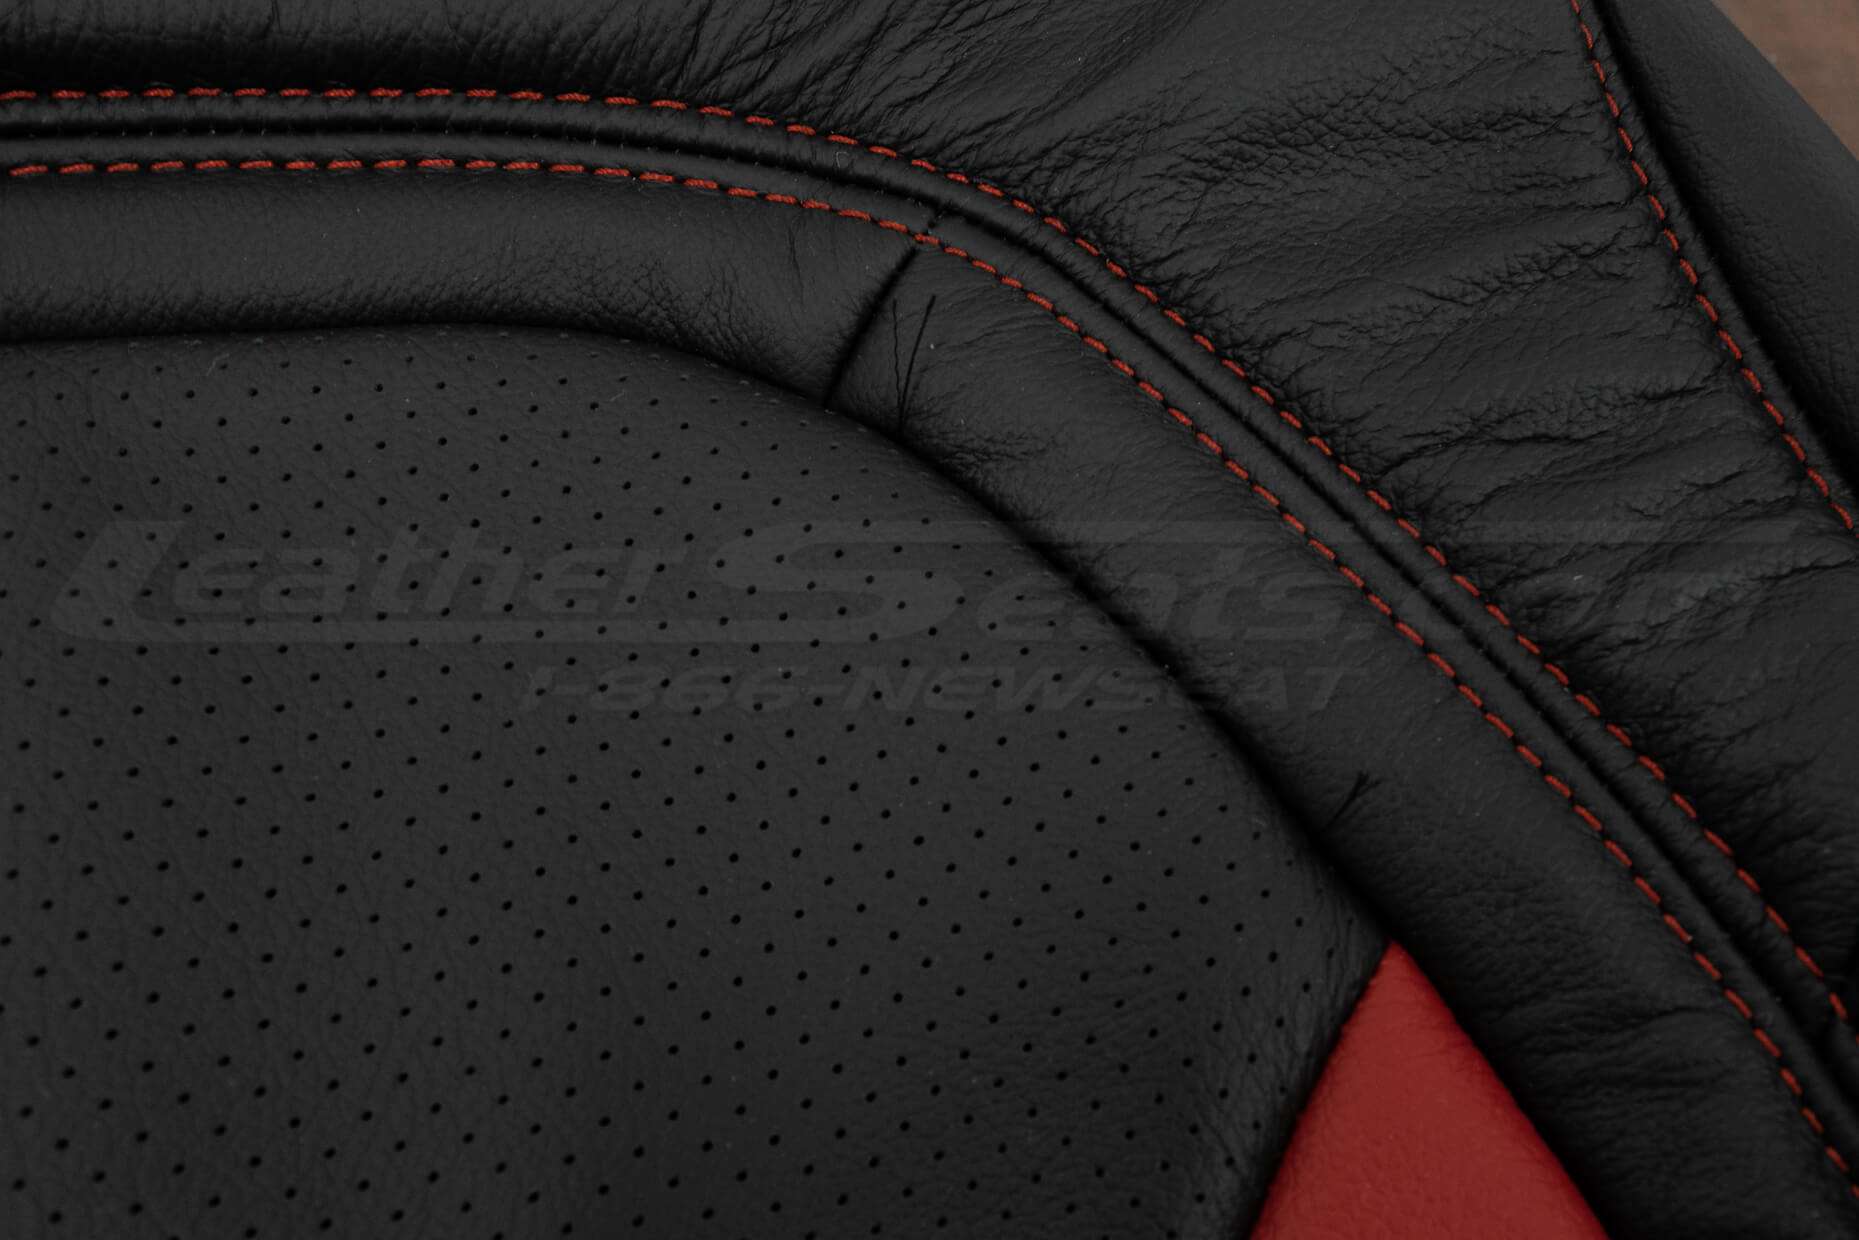 16-21 Chevrolet Camaro Upholstery Kit - Black & Red - Perforation and double-stitching close-up